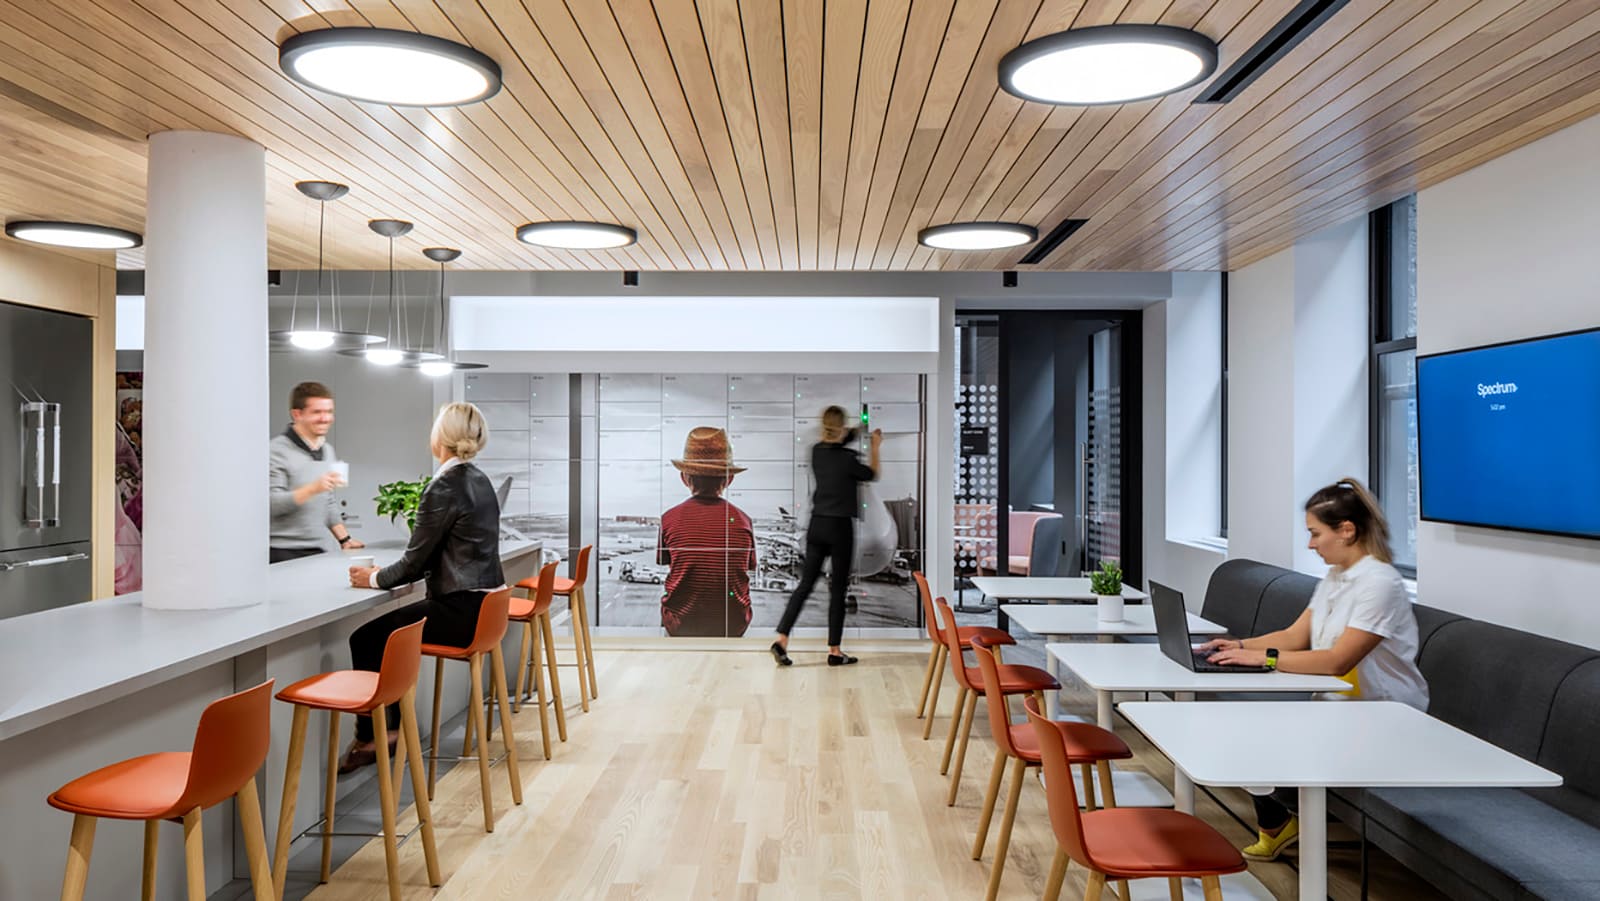 A locker and cafe space at MasterCard's New York City tech hub